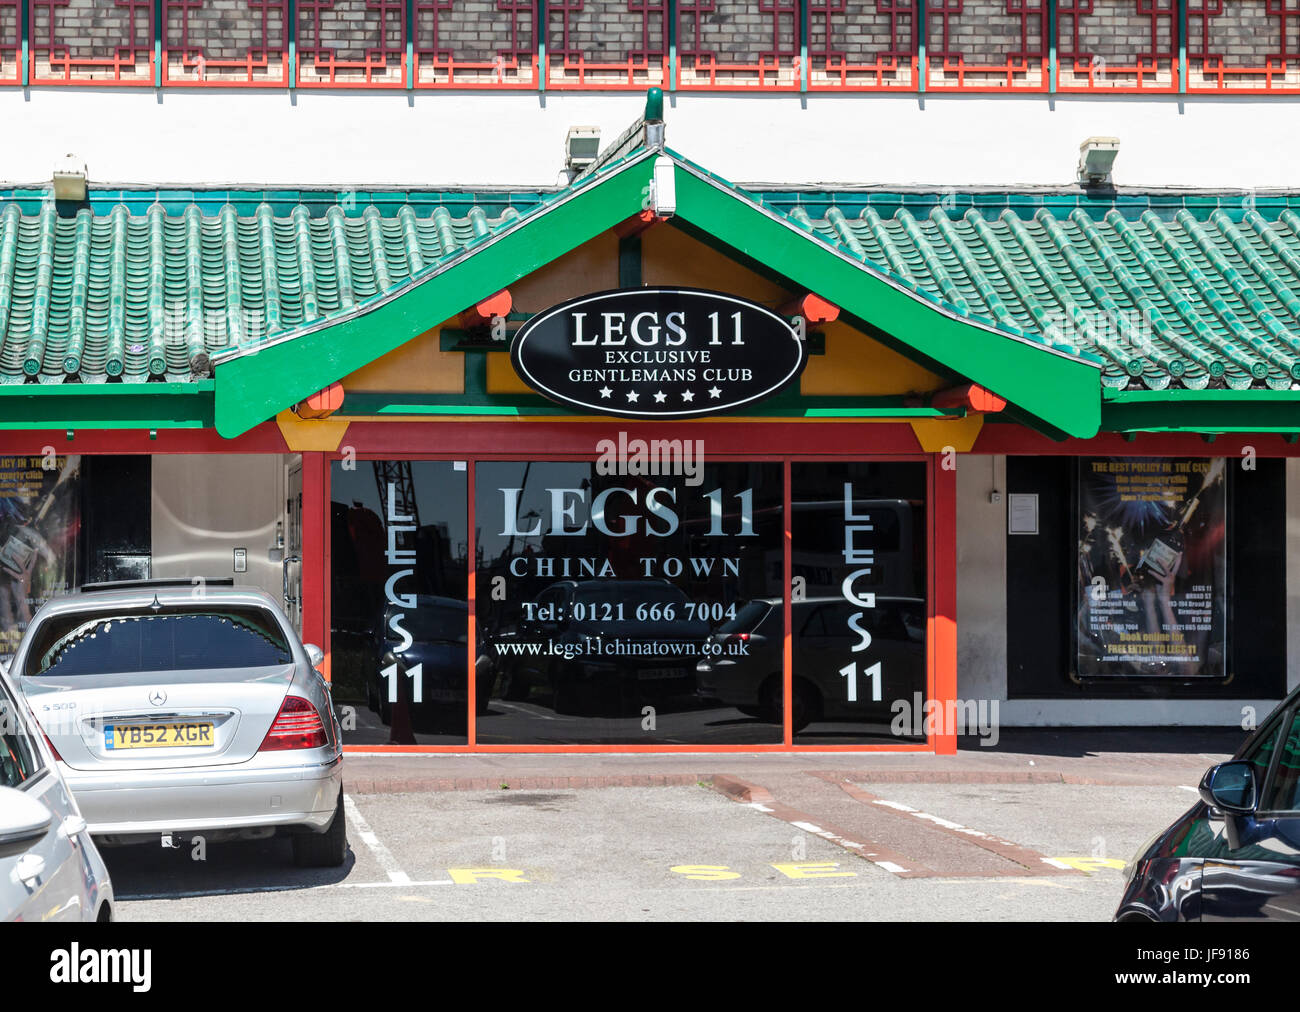 Exterior and entrance area of Legs 11, an 'exclusive gentleman's club' in the Chinatown area of Birmingham, England, USA Stock Photo